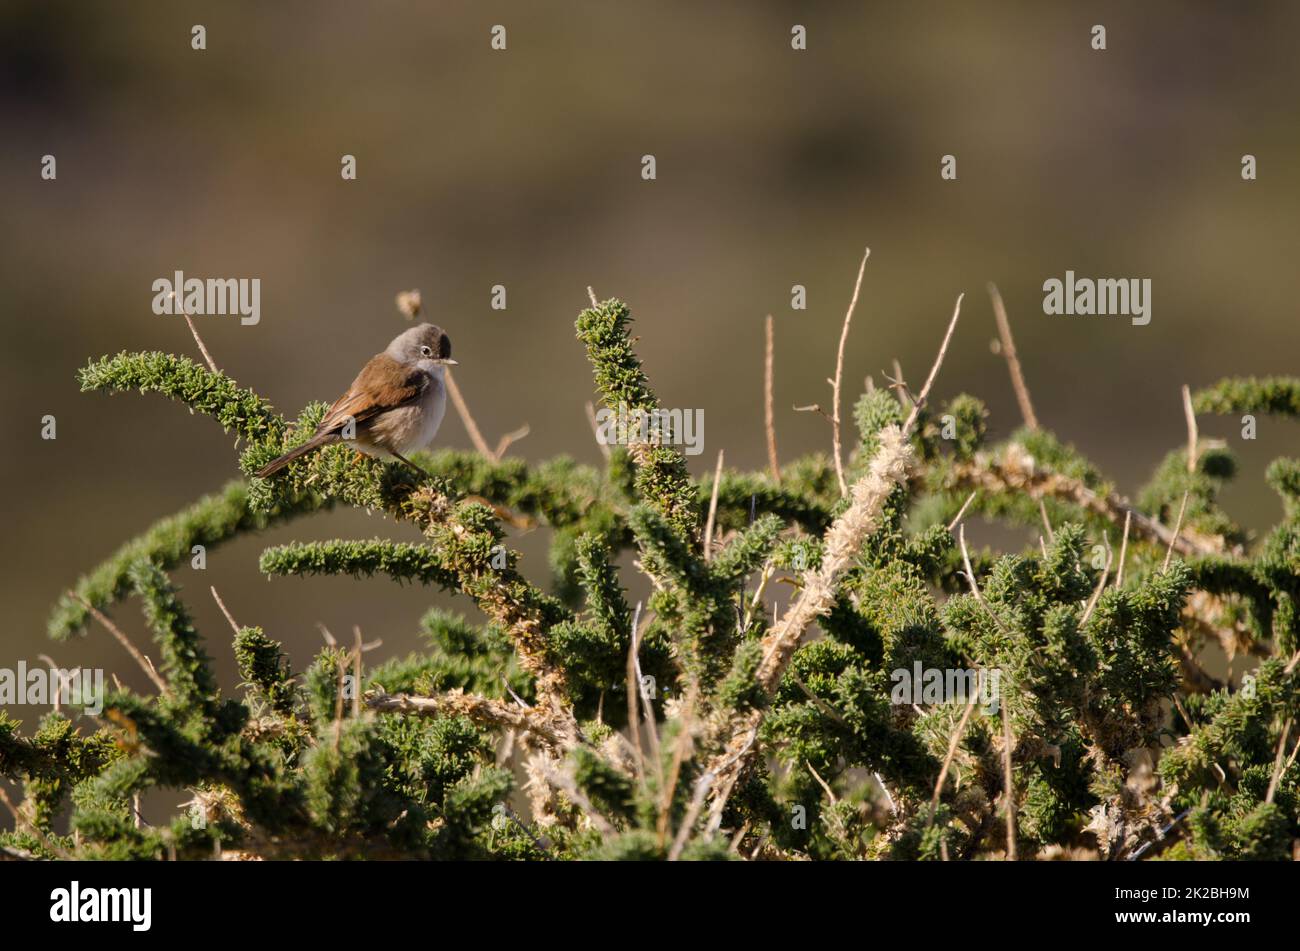 Spectacled warbler on a shrub. Stock Photo